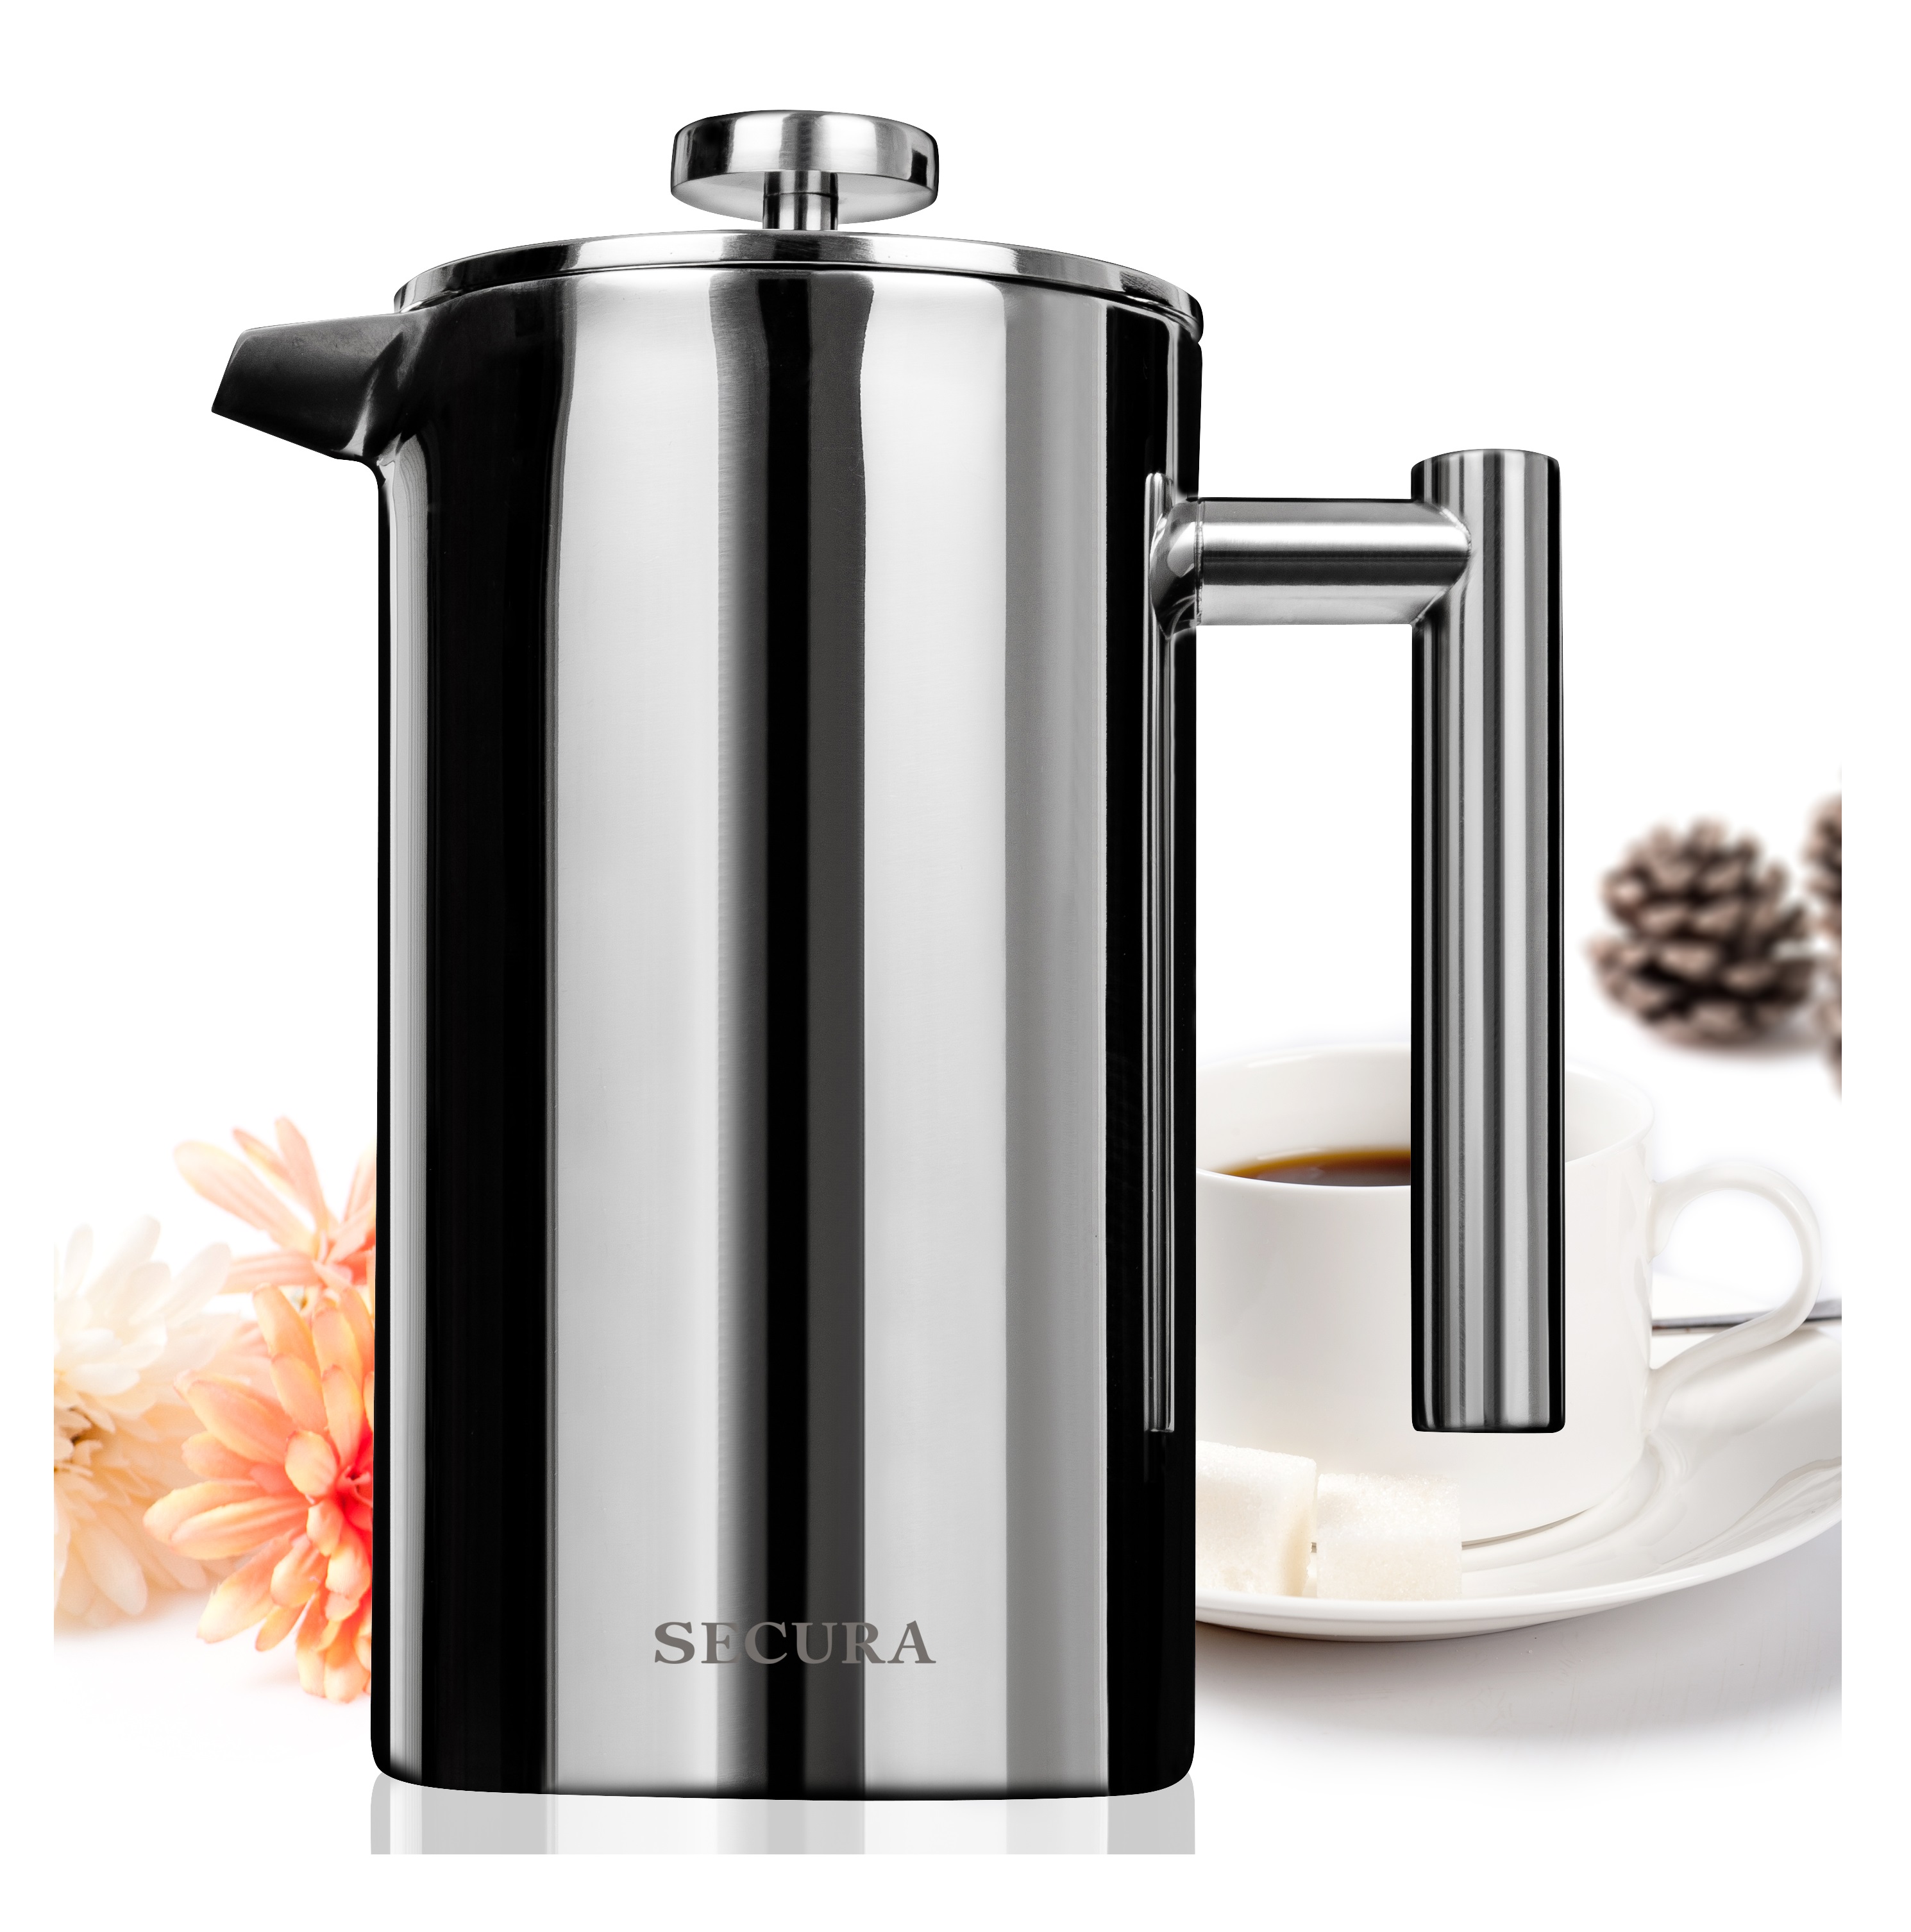 Secura French Press Coffee Maker, 17-Ounce, 18/10 Stainless Steel